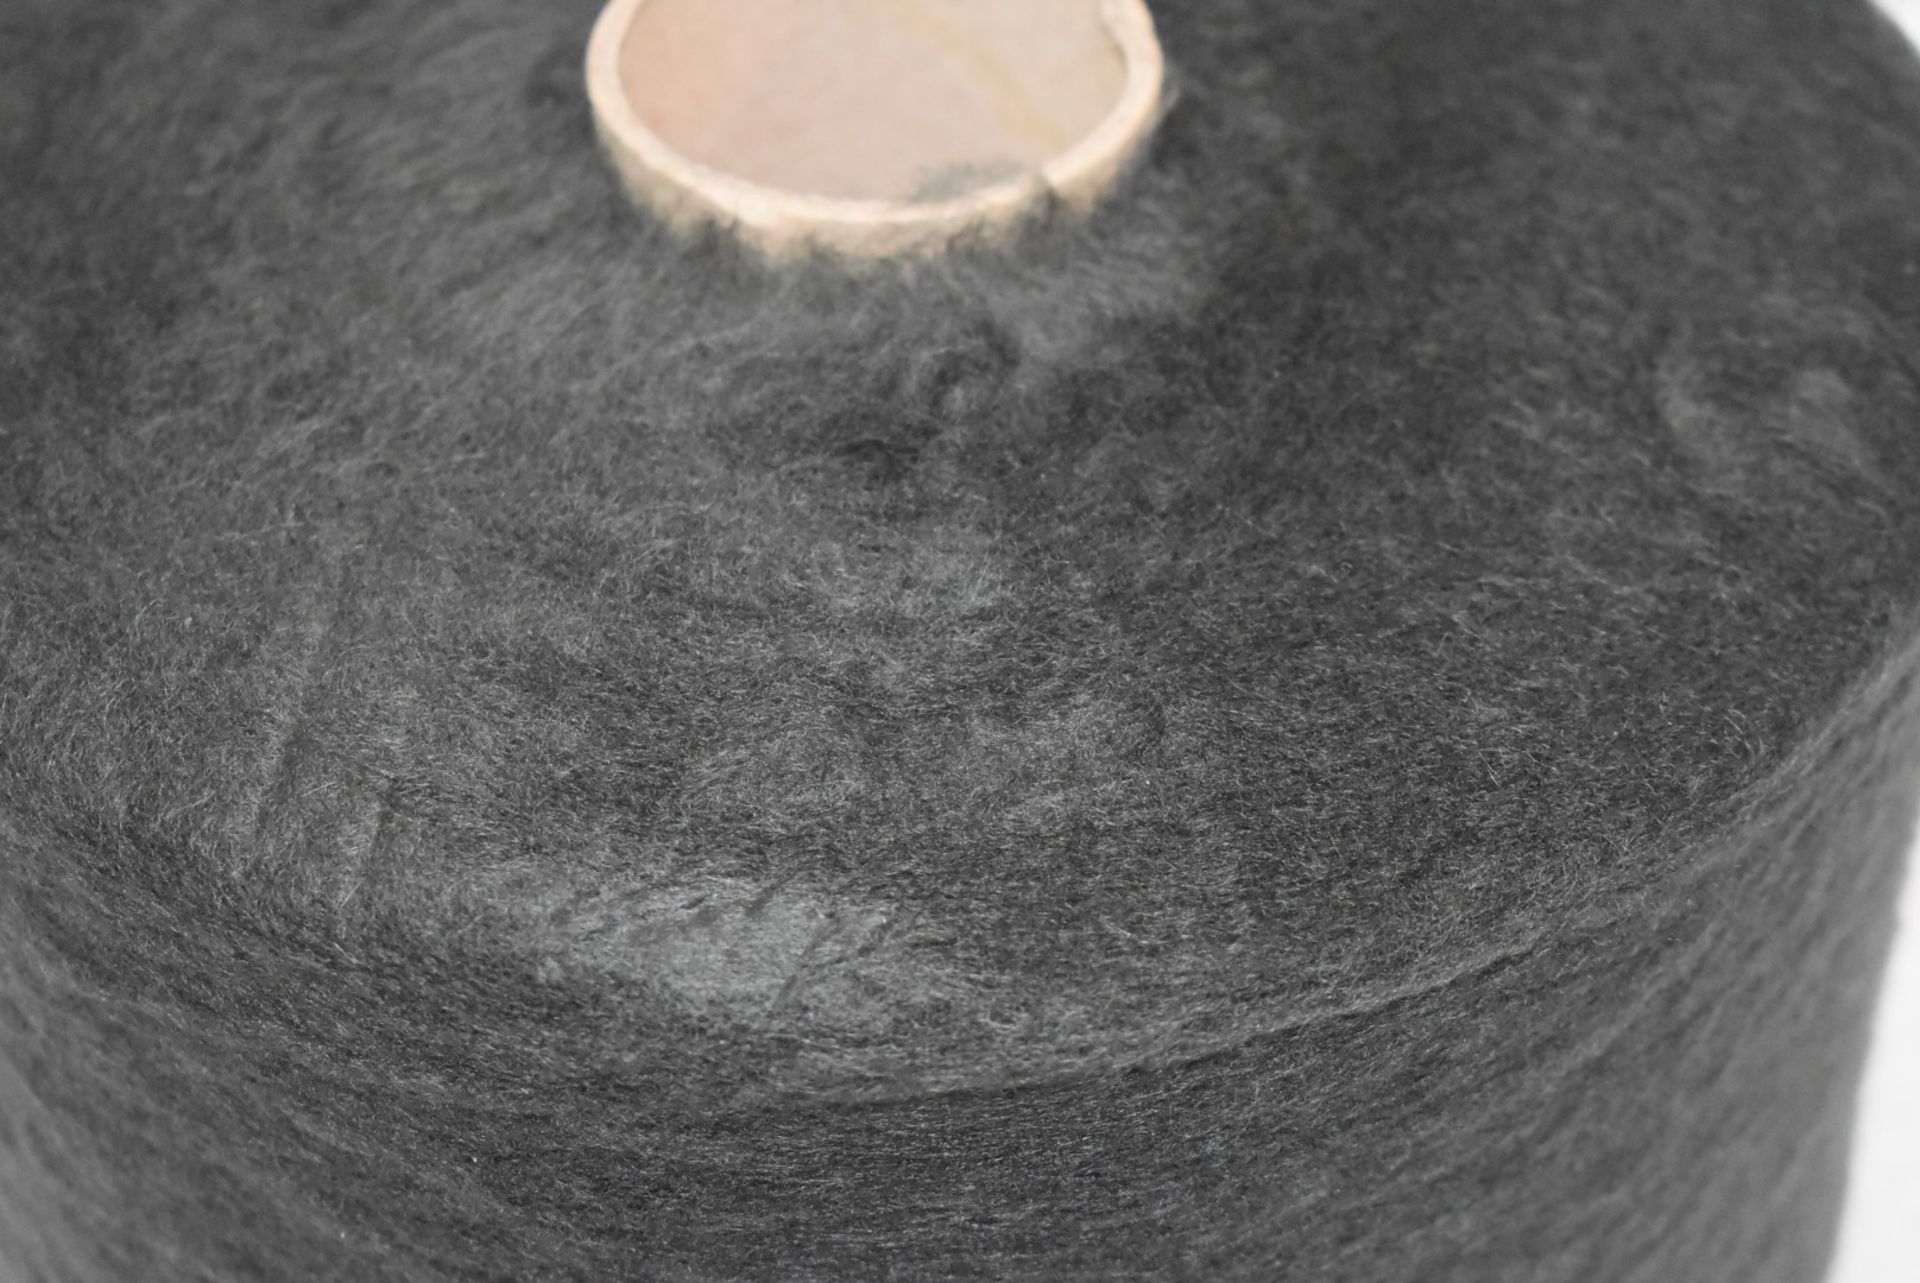 6 x Cones of 1/7,5 Lagona Knitting Yarn - Charcoal - Approx Weight: 2,300g - New Stock ABL Yarn - Image 8 of 11